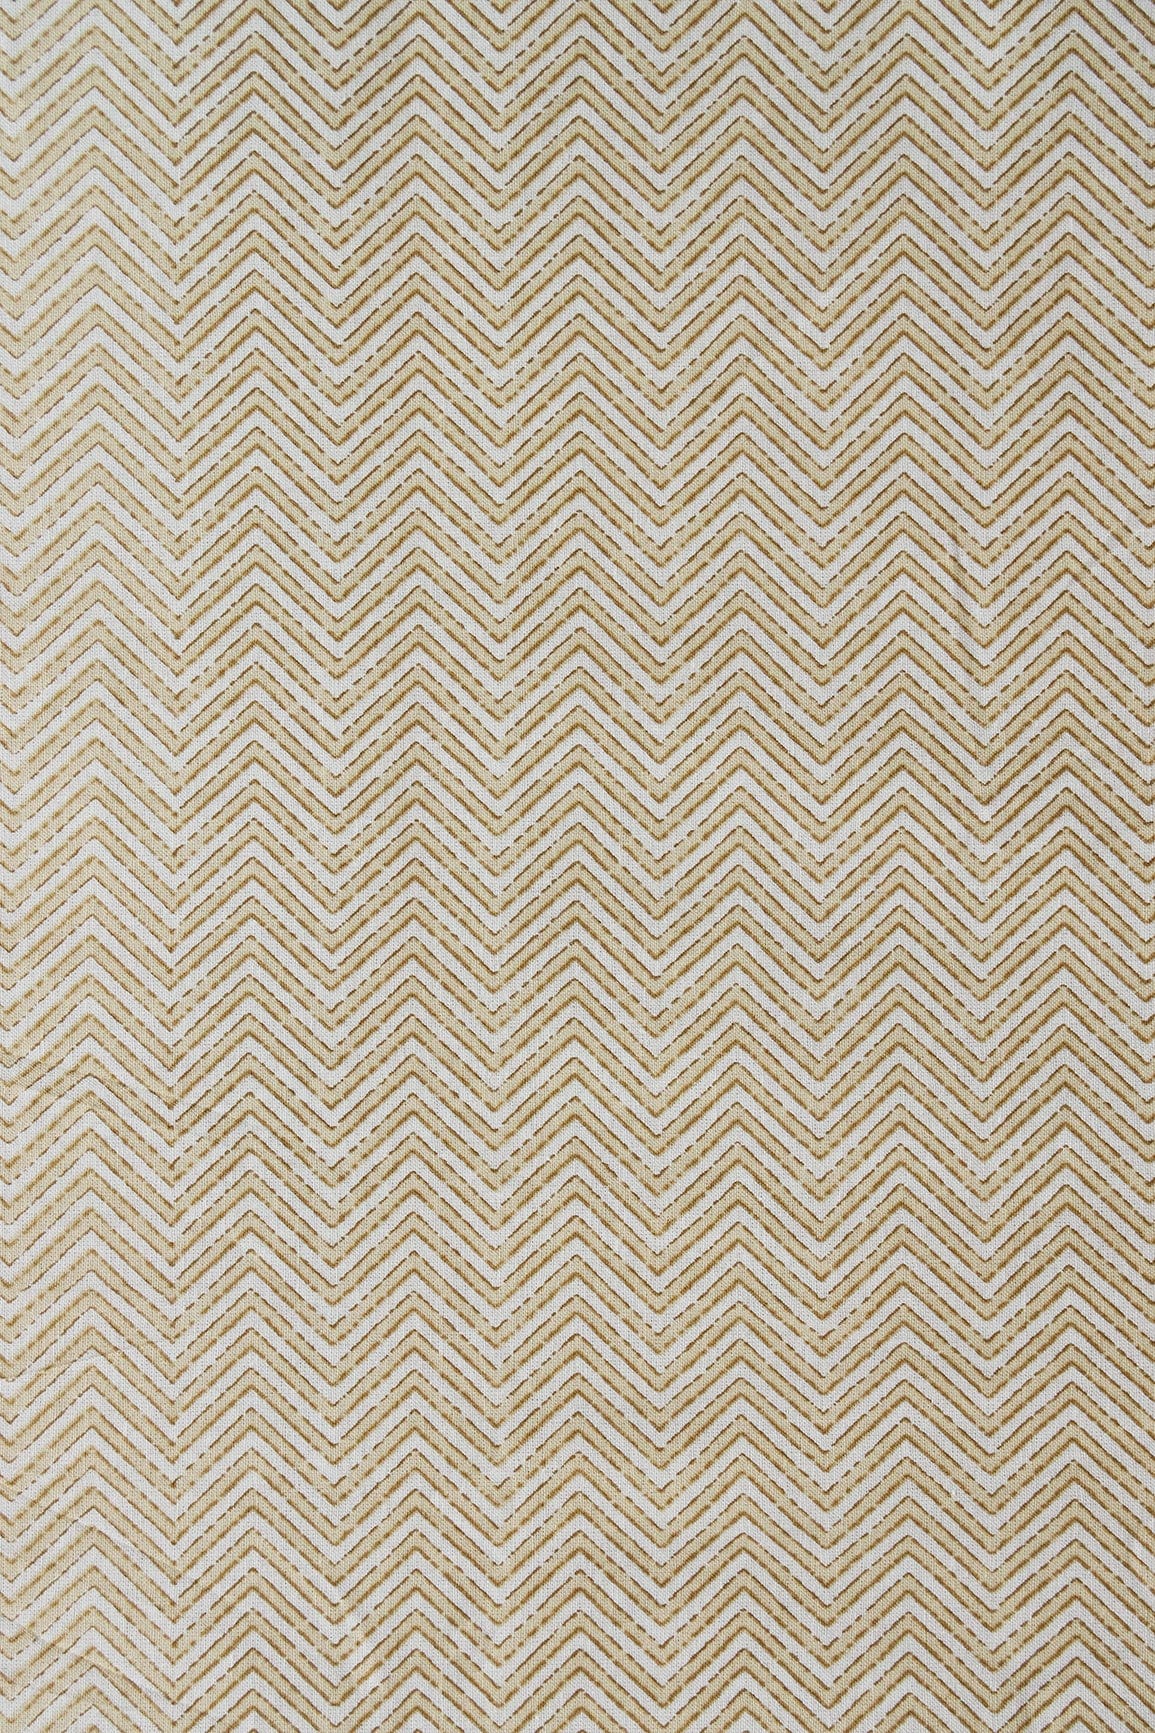 doeraa Prints Beige And Olive Chevron Print On Pure Mul Cotton Fabric